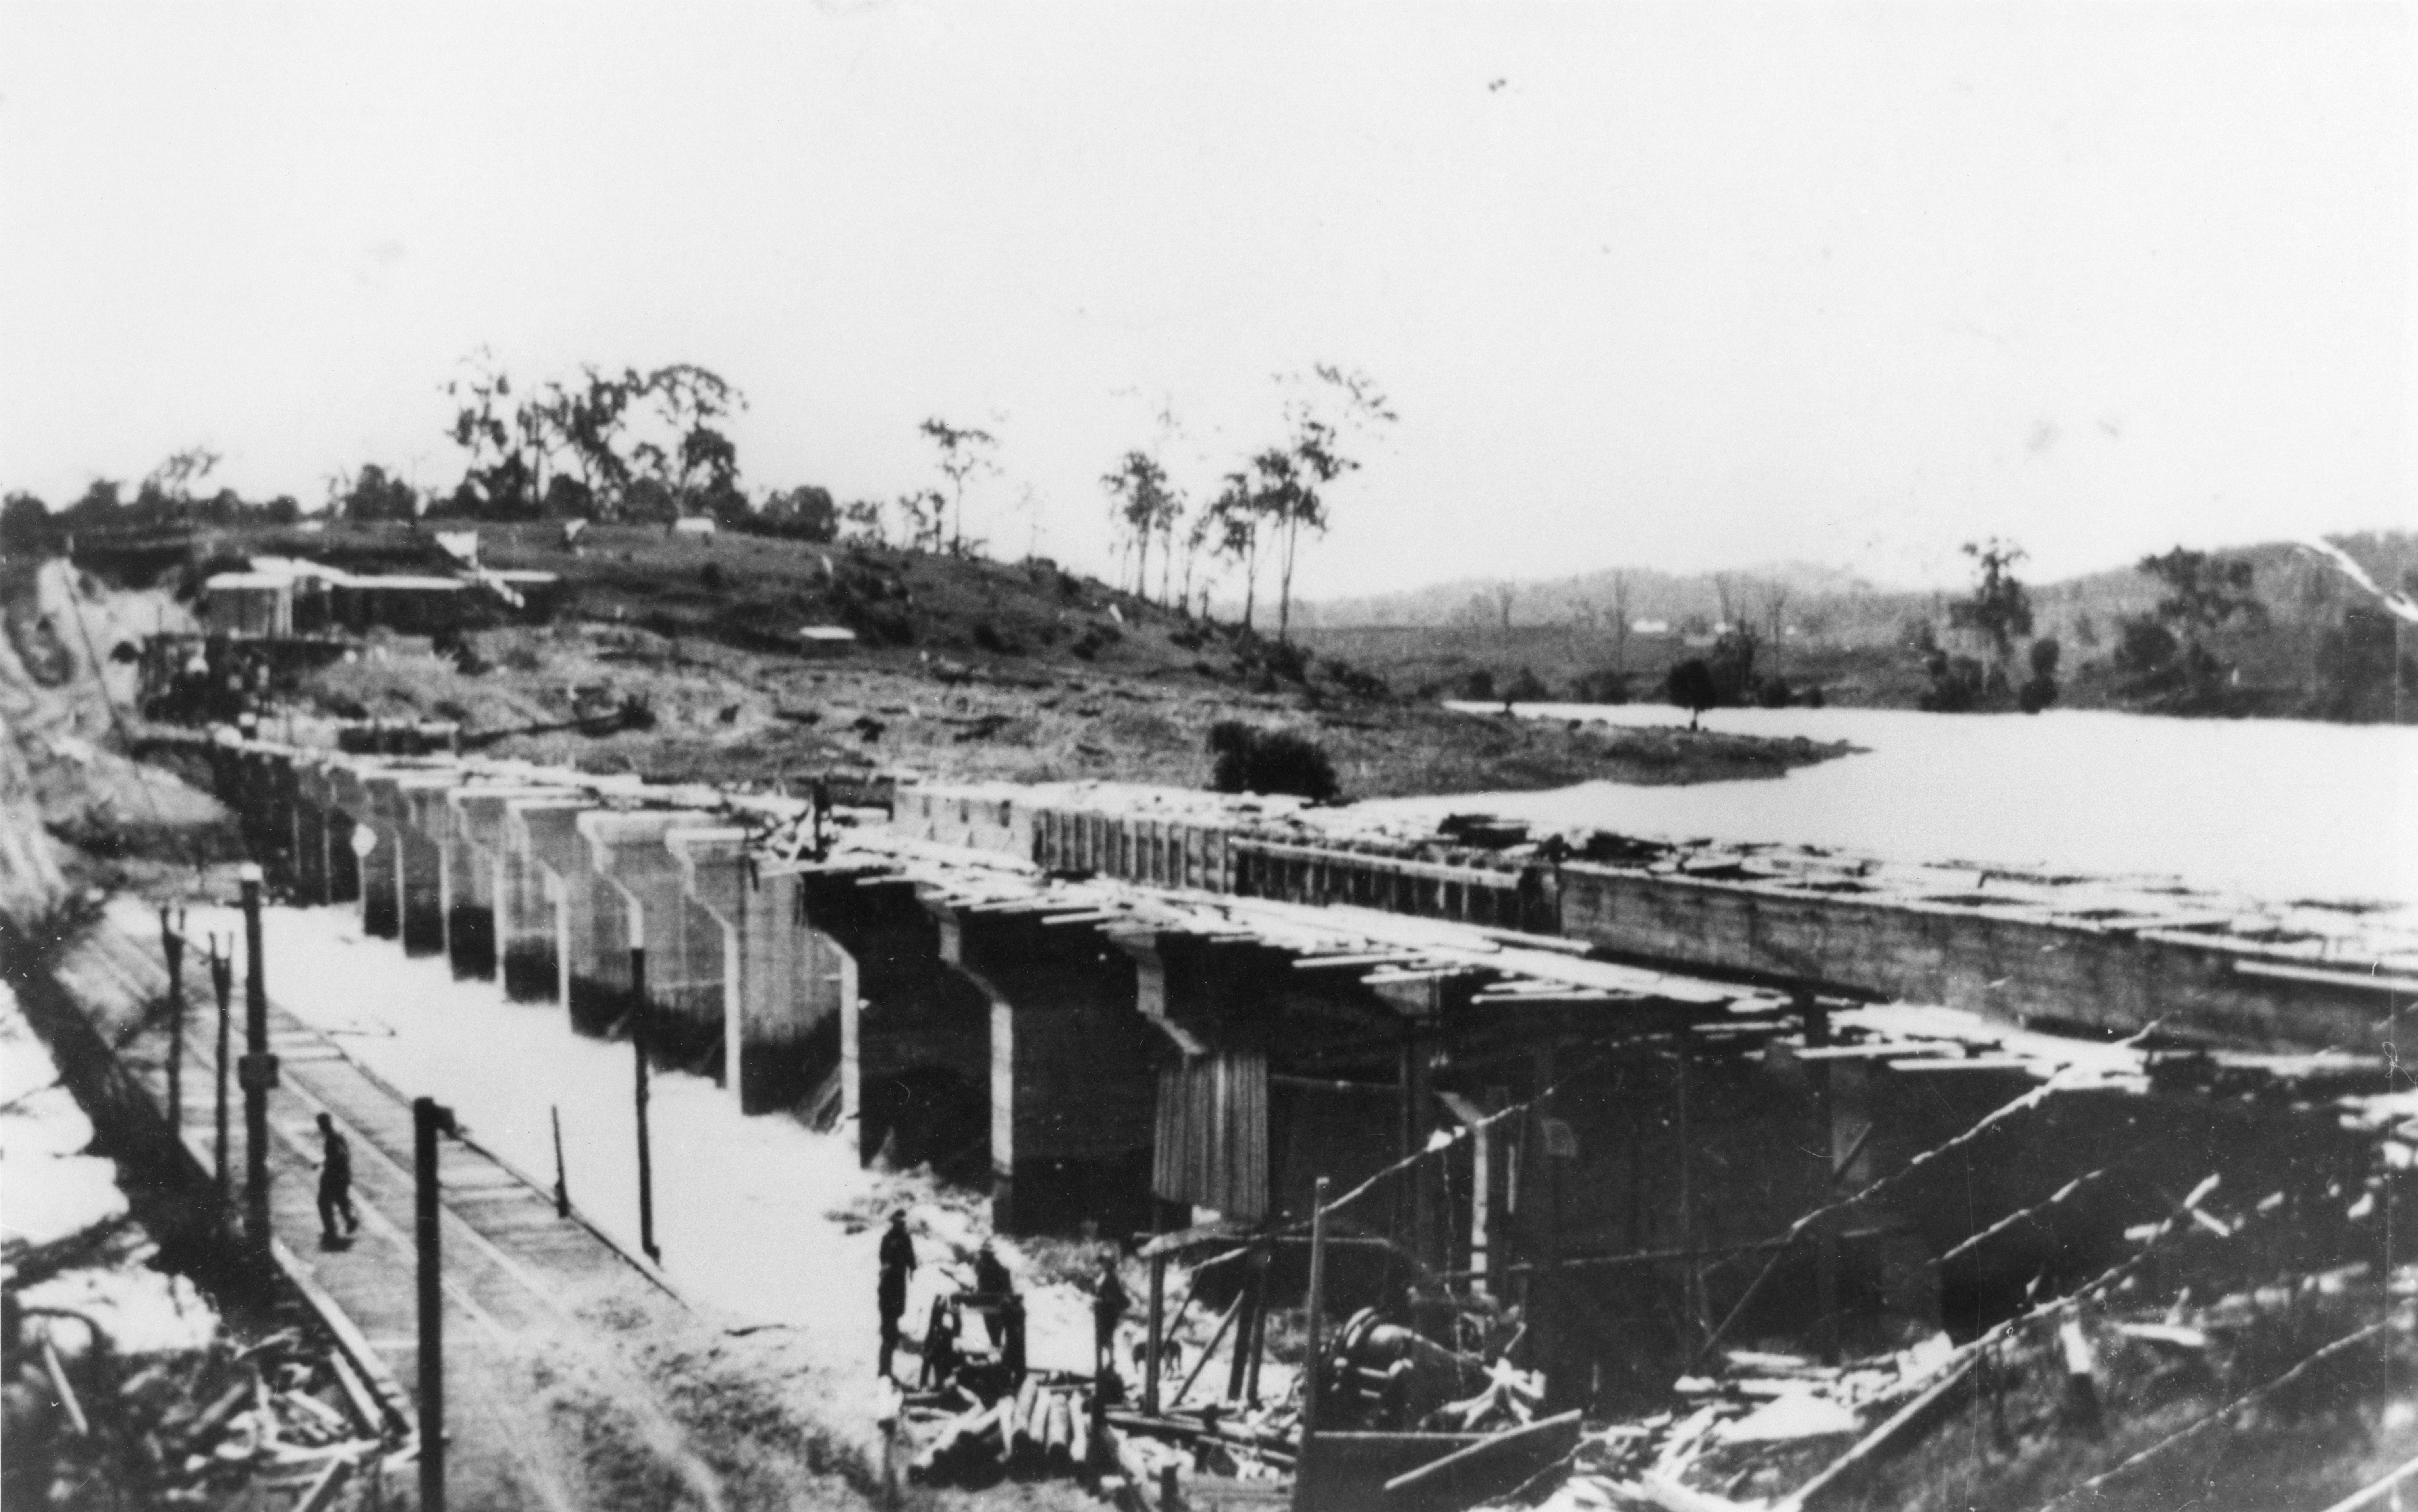 This is a historical image of the Weir and Bridge over the Brisbane River at Mount Crosby, 1926 (2007): Digitised Copy Print from 7499 Photograph Albums of the Mount Crosby Pumping Station.